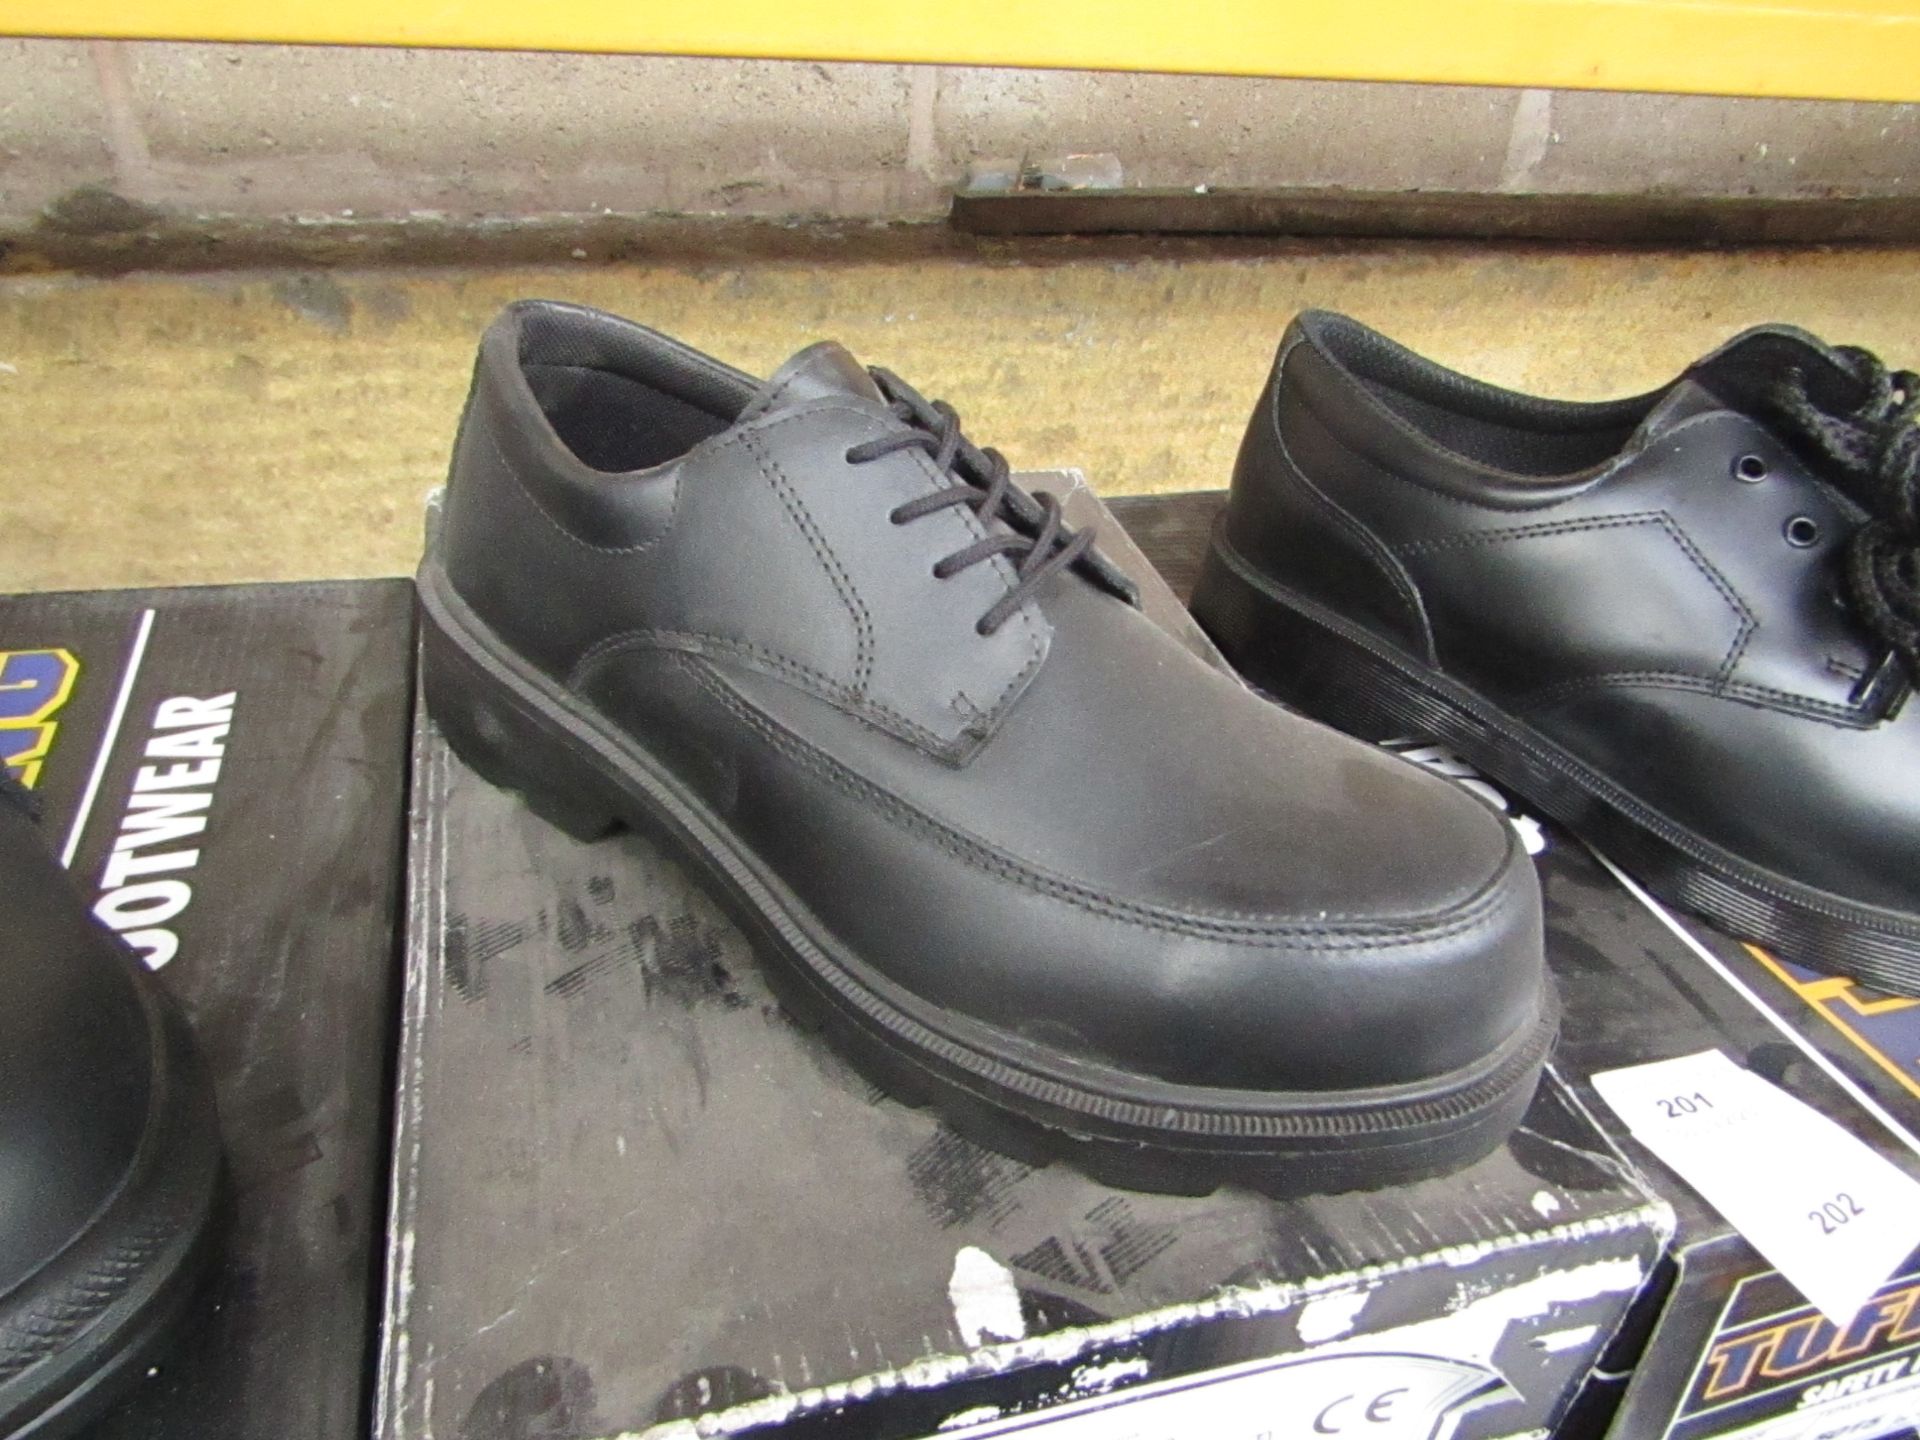 Capps safety steel toe-cap shoes, size 7, new and boxed.